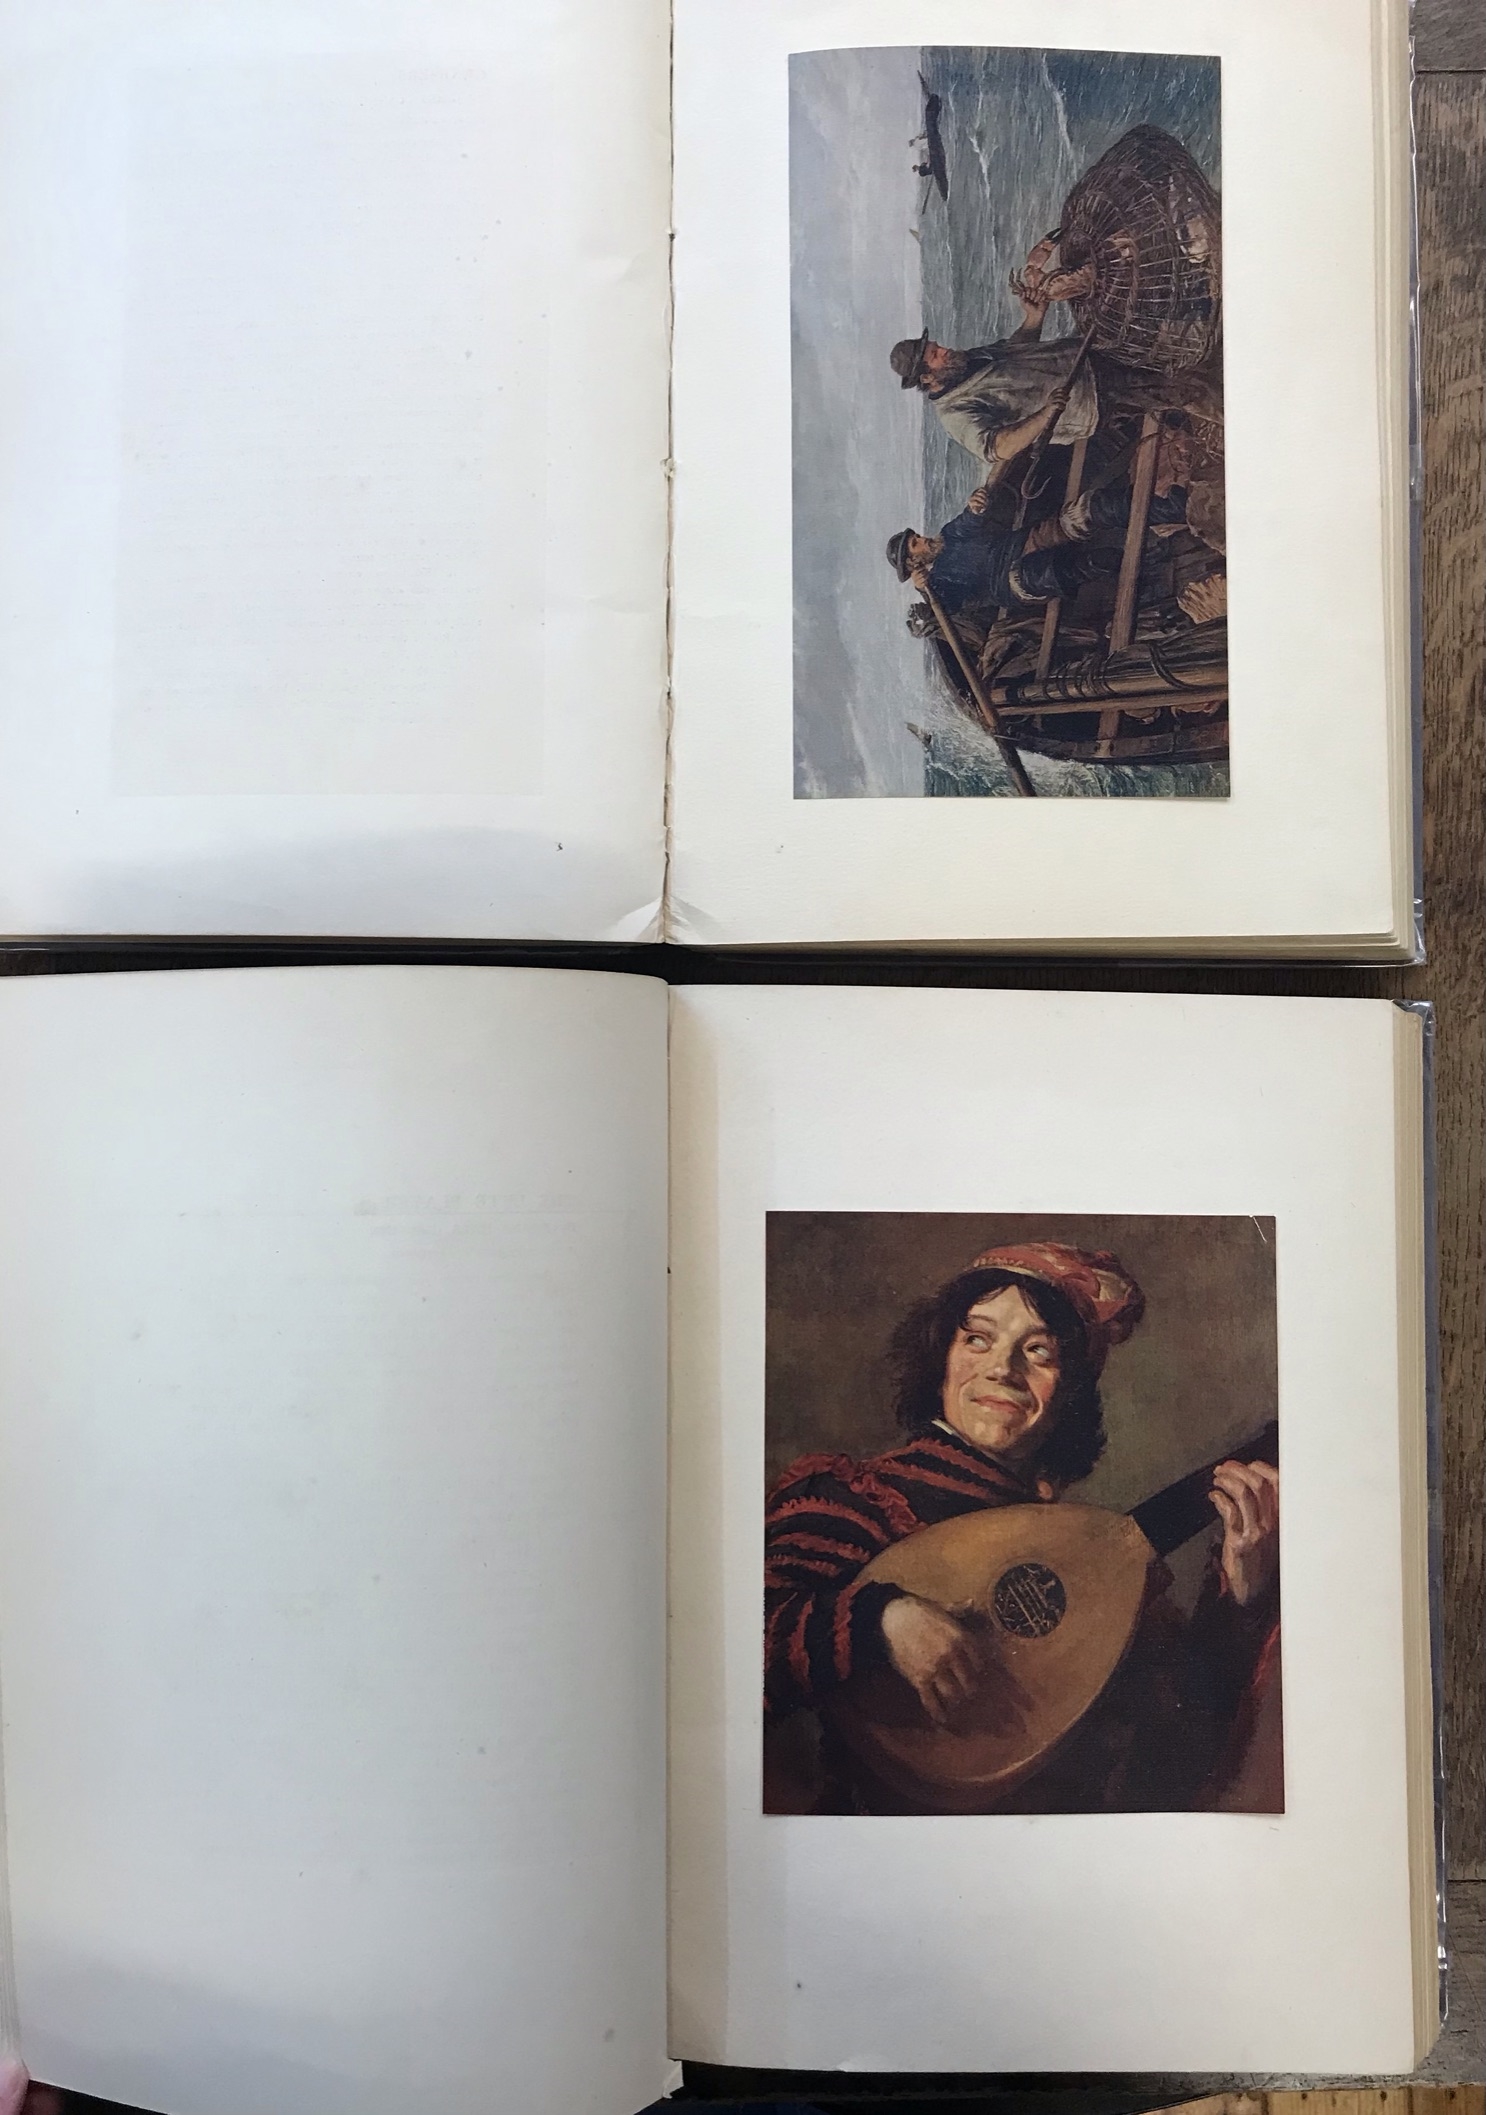 Great Pictures by Great Painters Volumes 1 and 2, features paintings from the Public Galleries of - Image 2 of 4